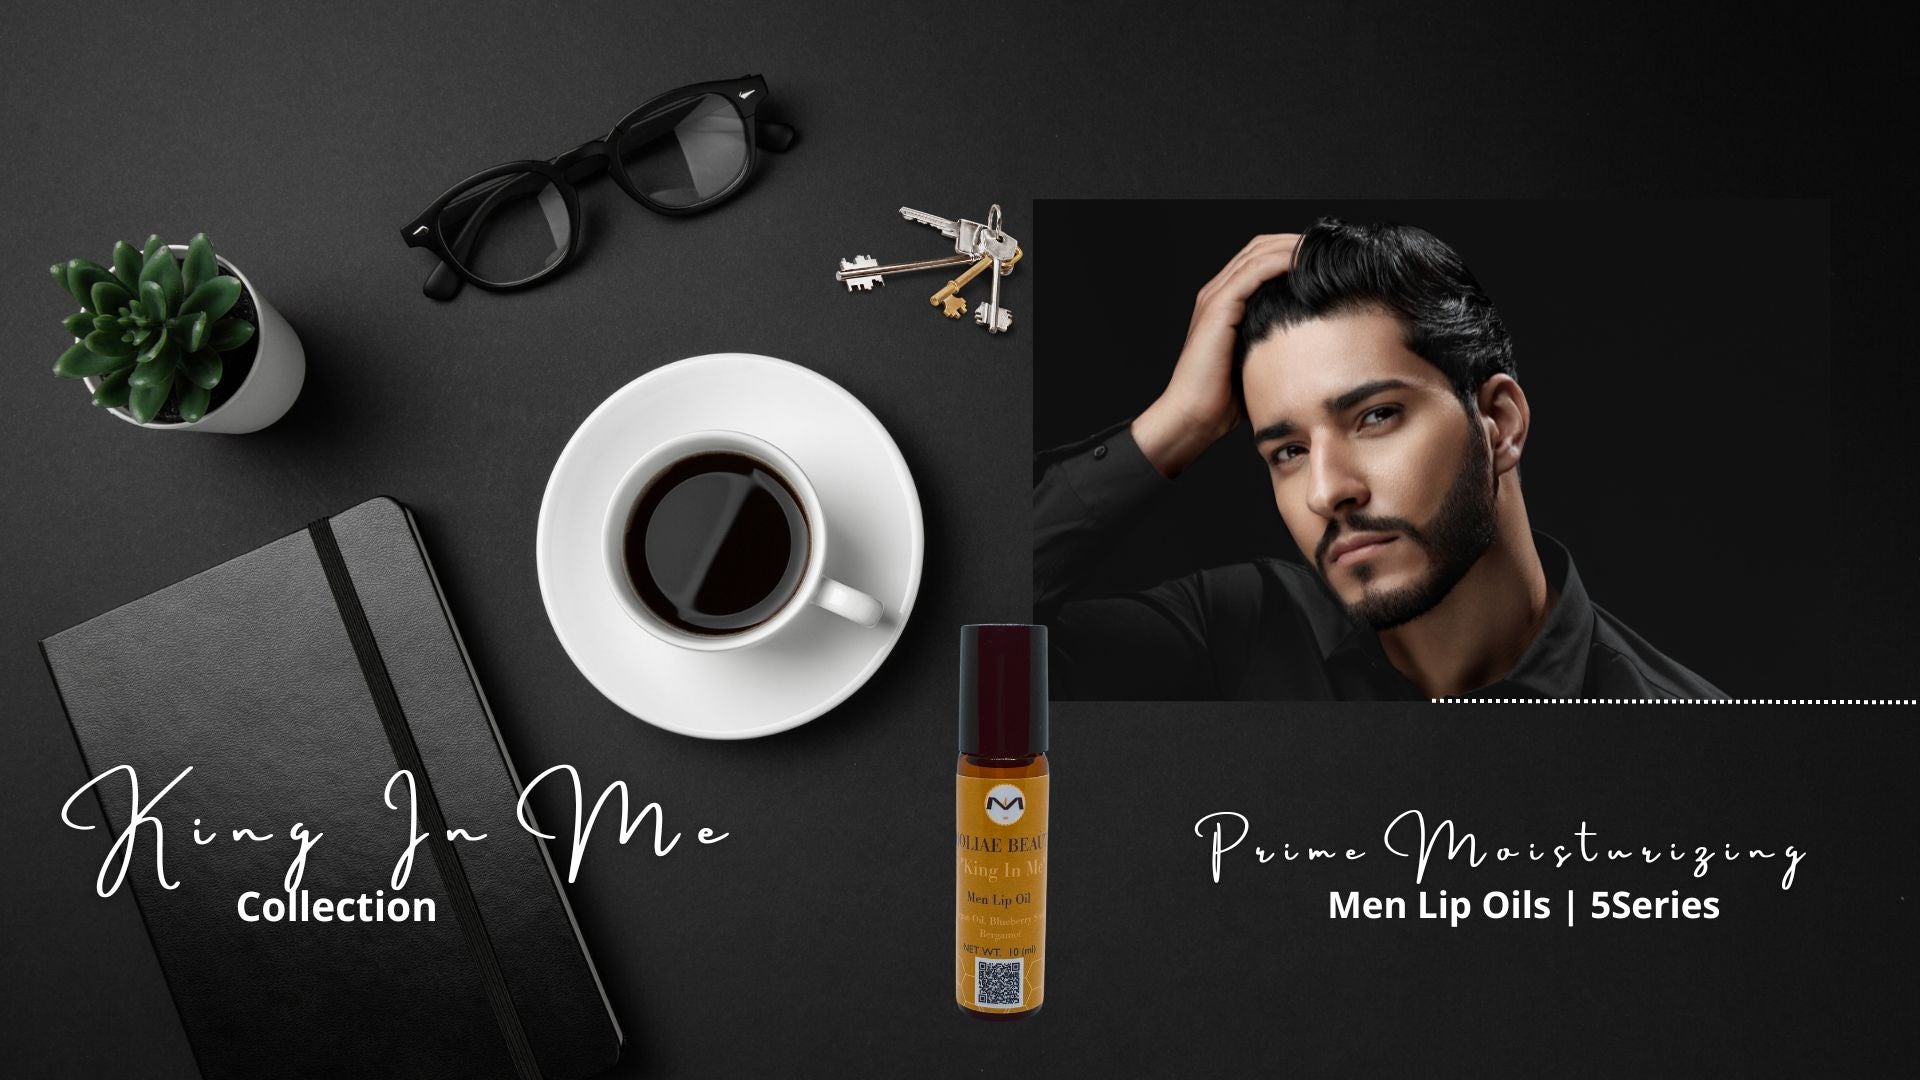 Men Lip Oil MOLIAE BEAUTY KING IN ME COLLECTION